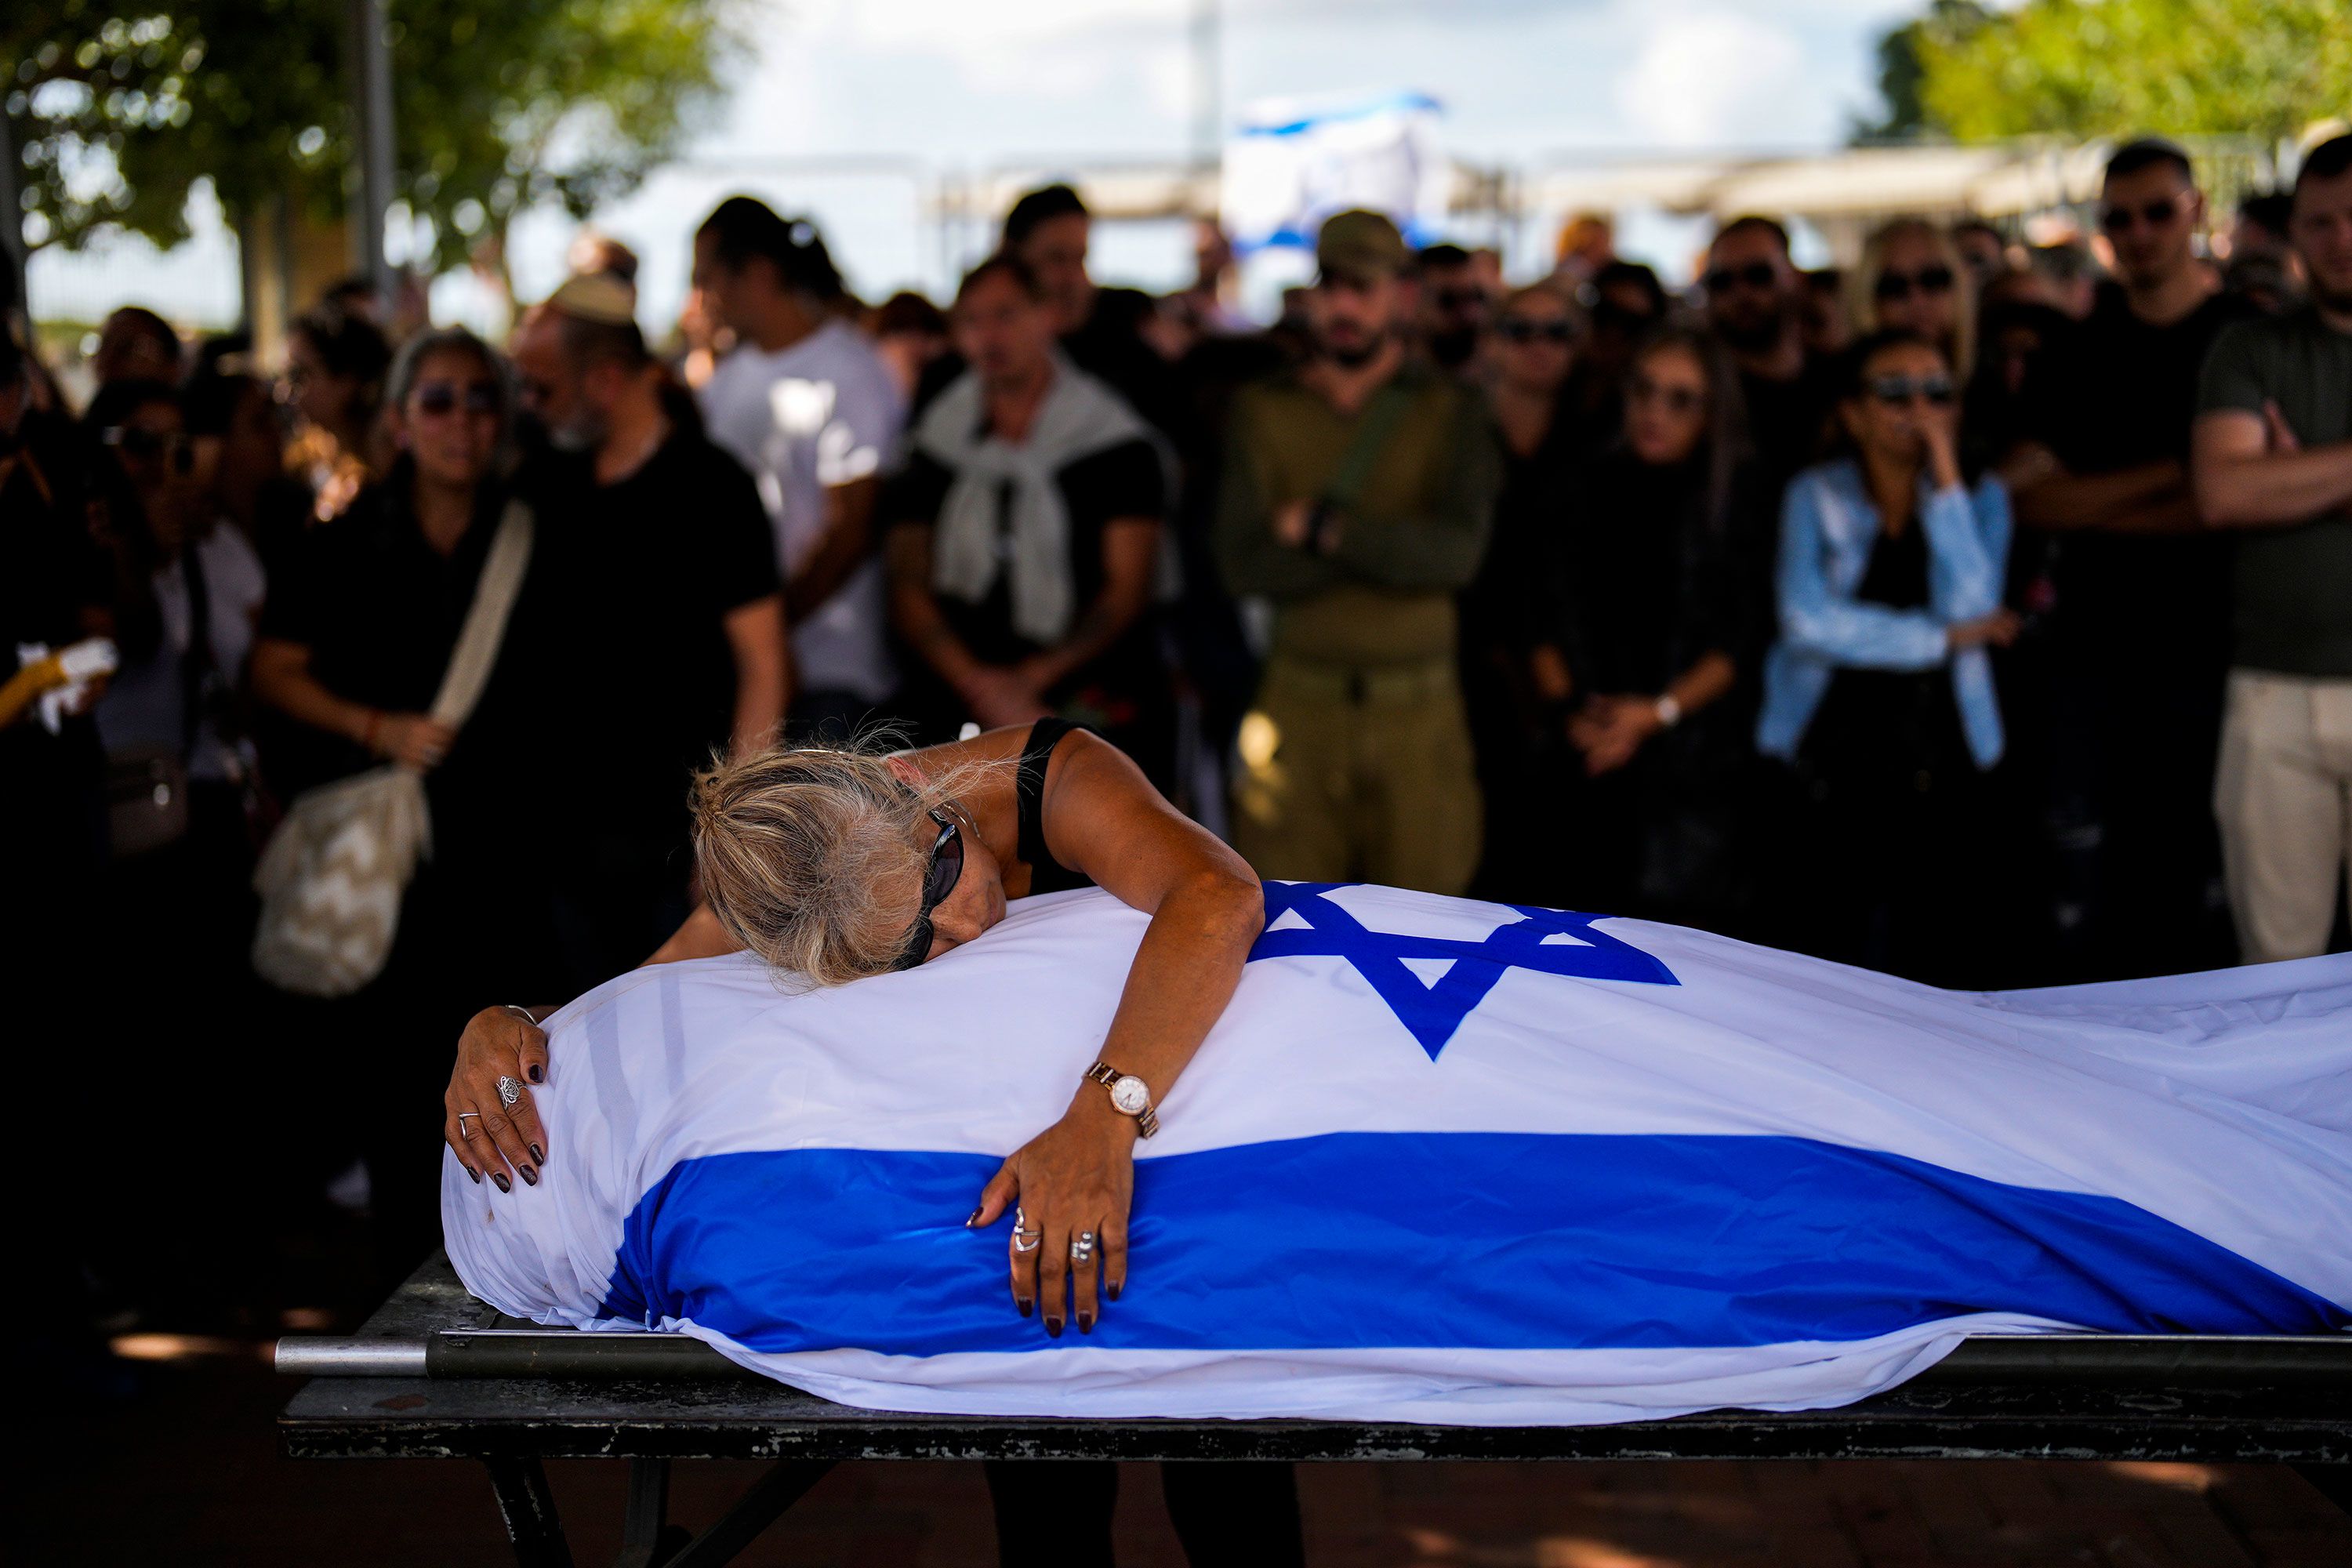 Antonio Macías' mother cries over her son's body at Pardes Haim cemetery in Kfar Saba, Israel, on October 15. Macías was killed by Hamas at an <a href='https://www.cnn.com/2023/10/07/middleeast/israel-gaza-fighting-hamas-attack-music-festival-intl-hnk/index.html' target='_blank'>Israeli music festival</a> earlier this month.